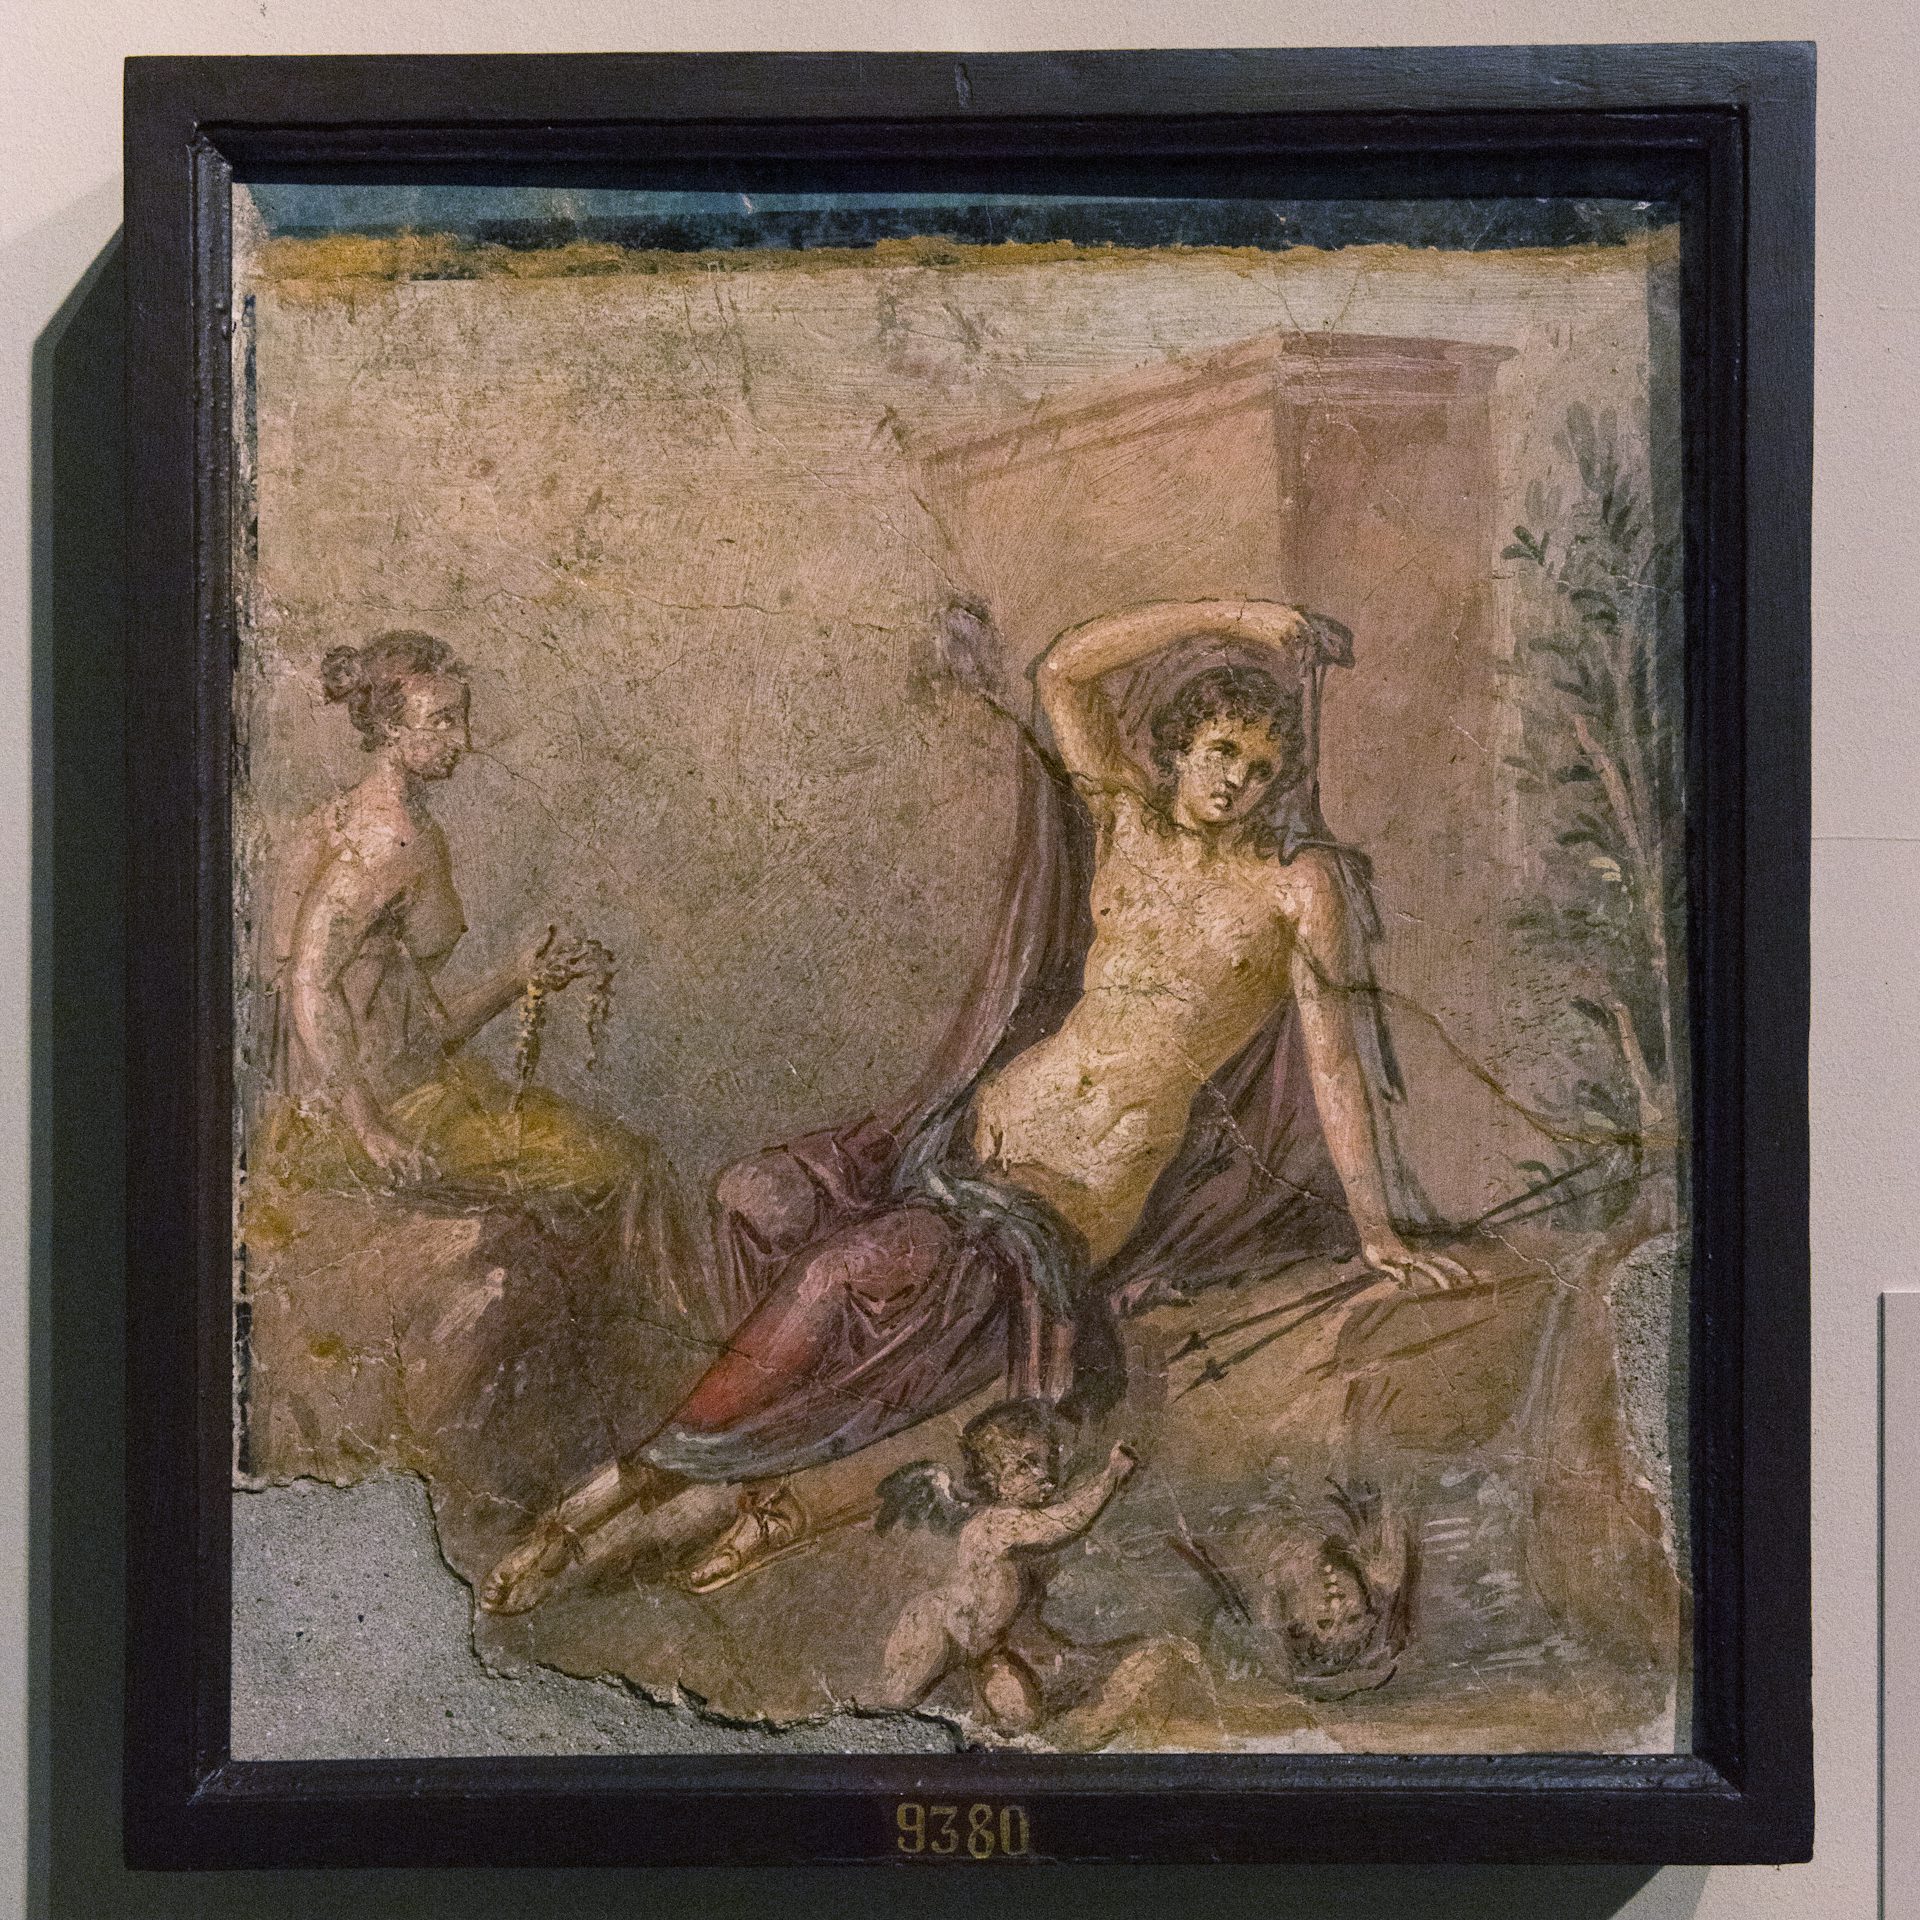 Fresco showing Echo and Narcissus